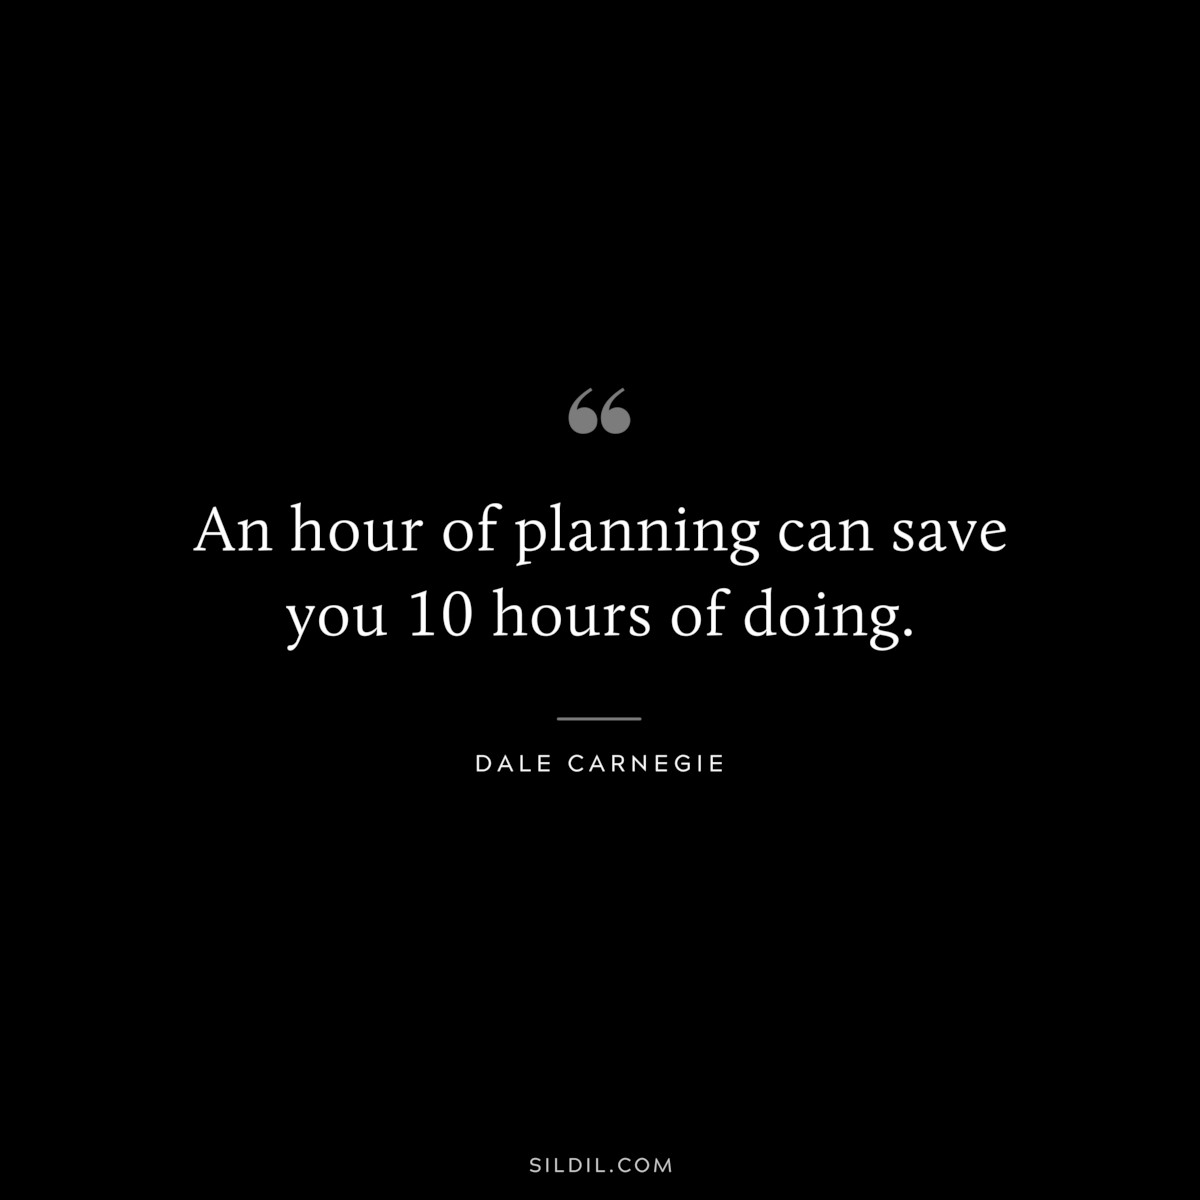 An hour of planning can save you 10 hours of doing.― Dale Carnegie